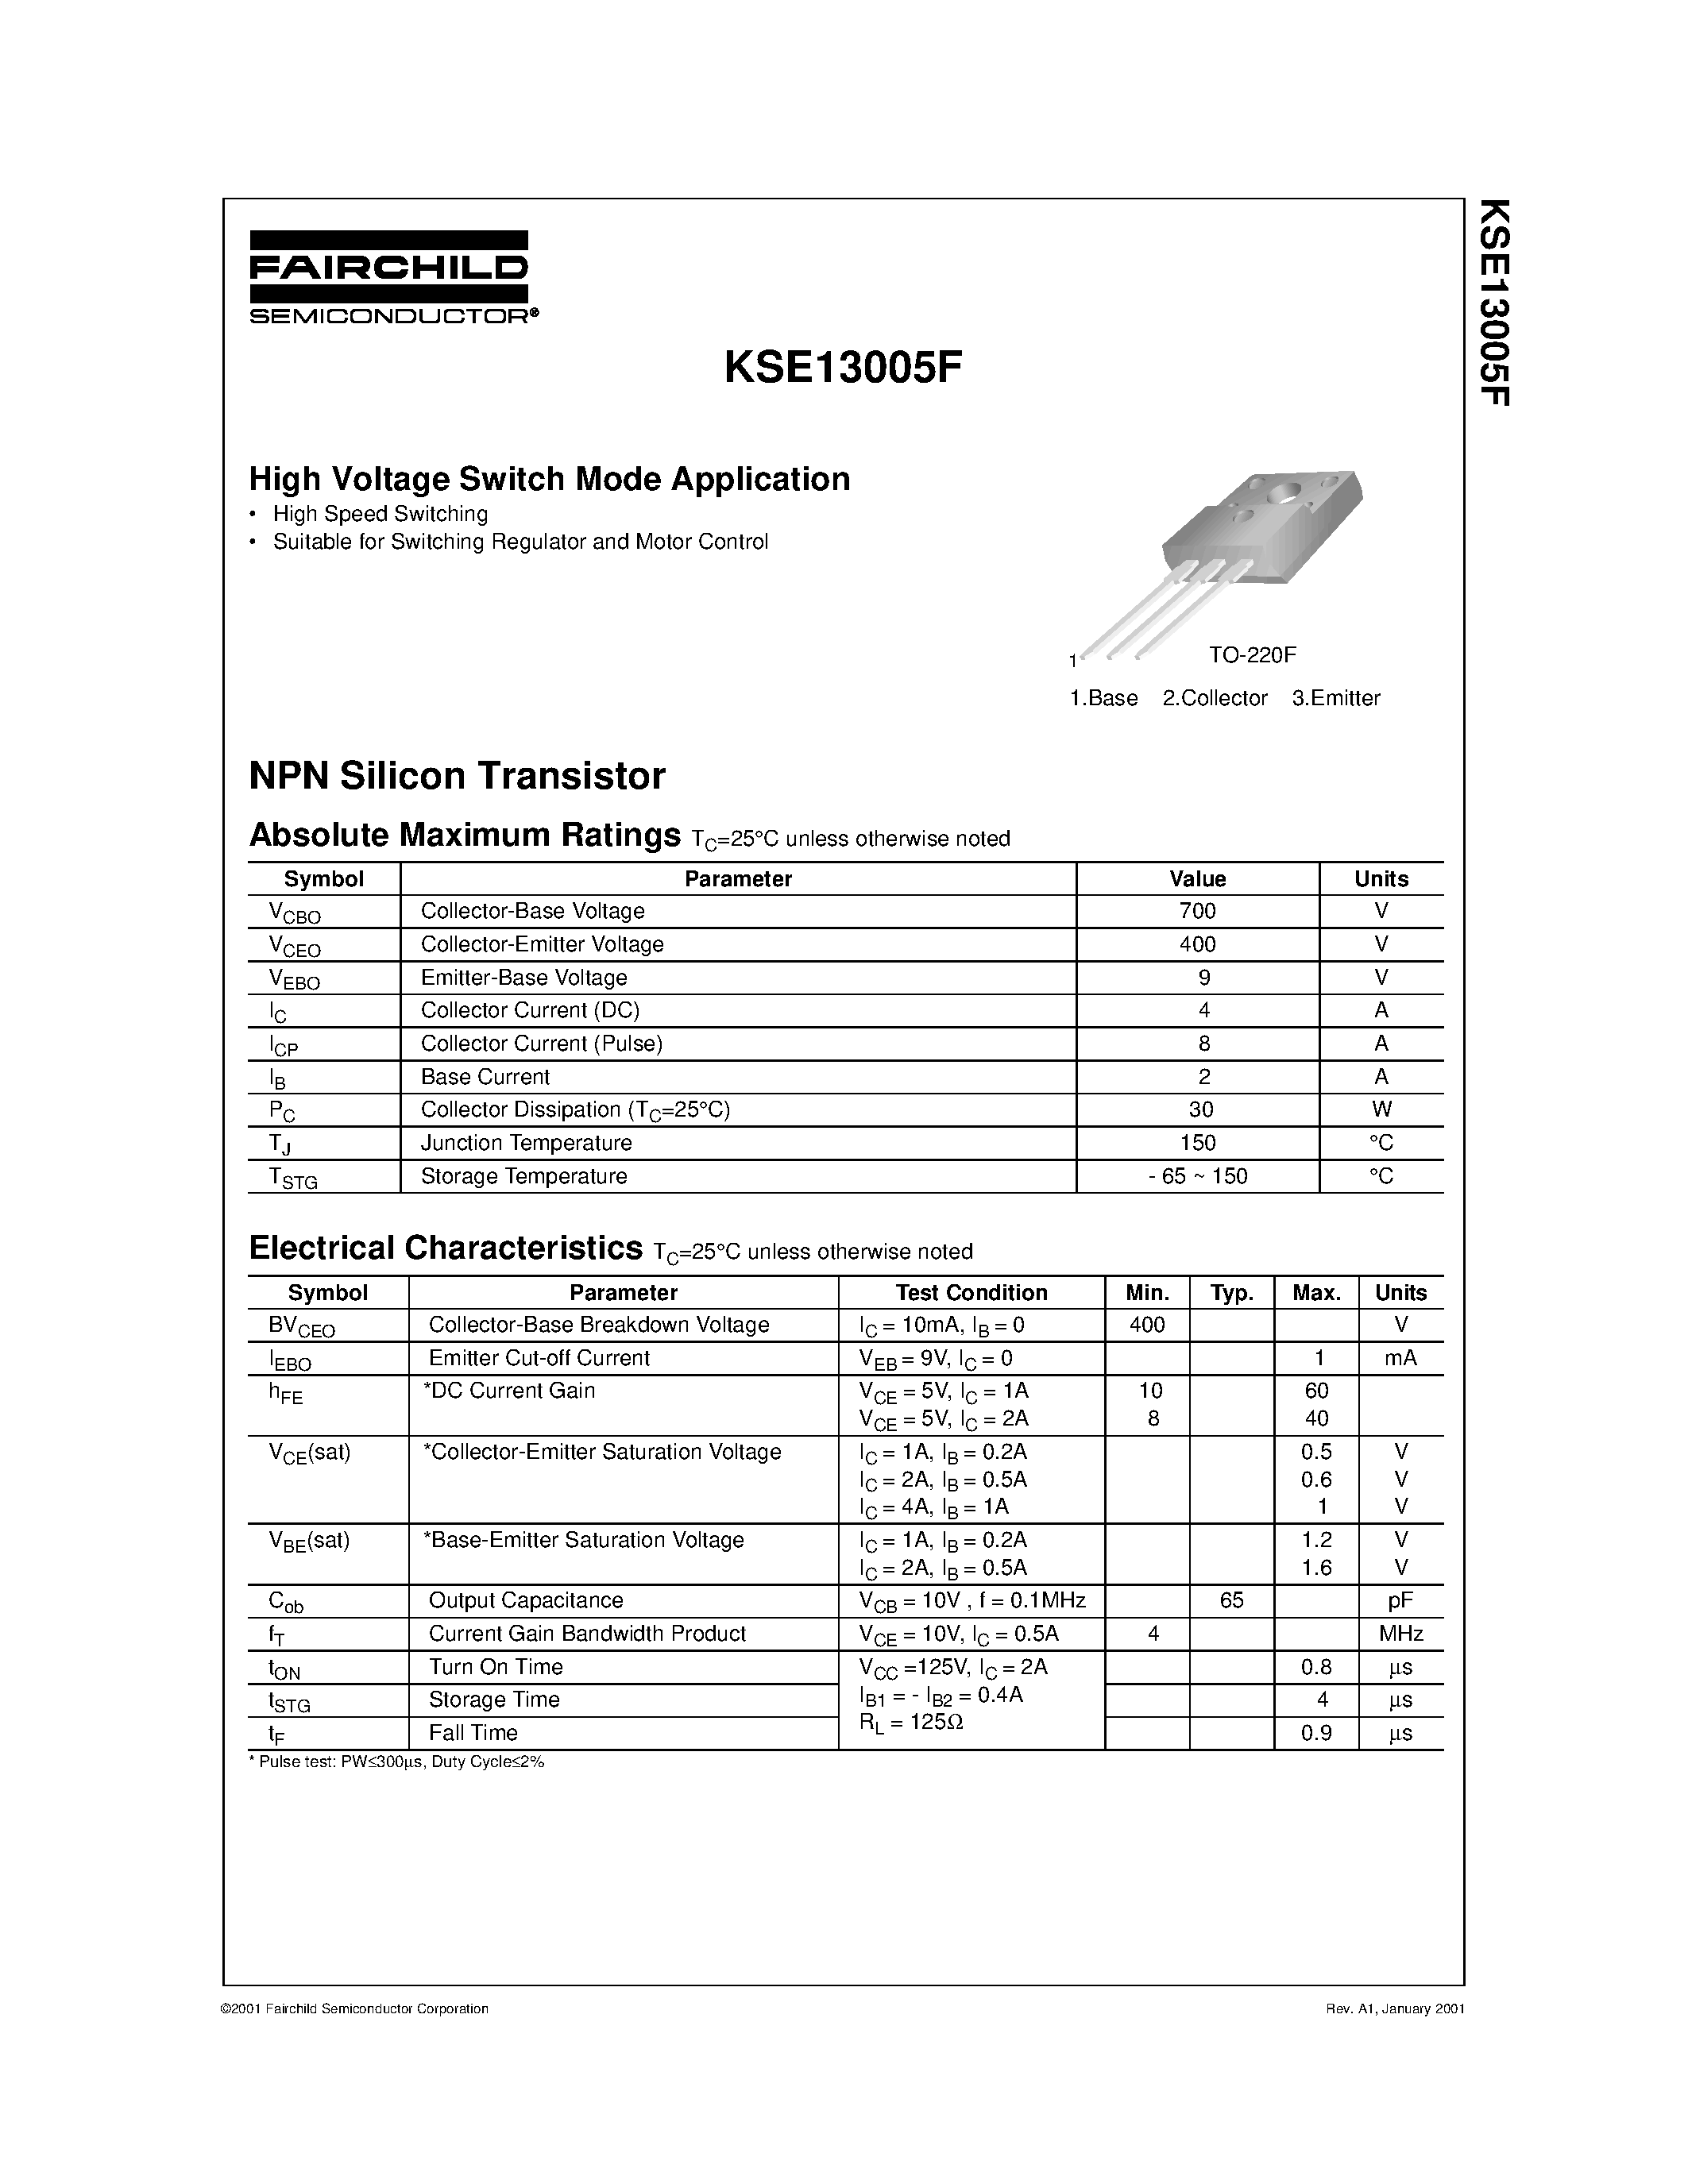 Datasheet KSE13005F - High Voltage Switch Mode Application page 1